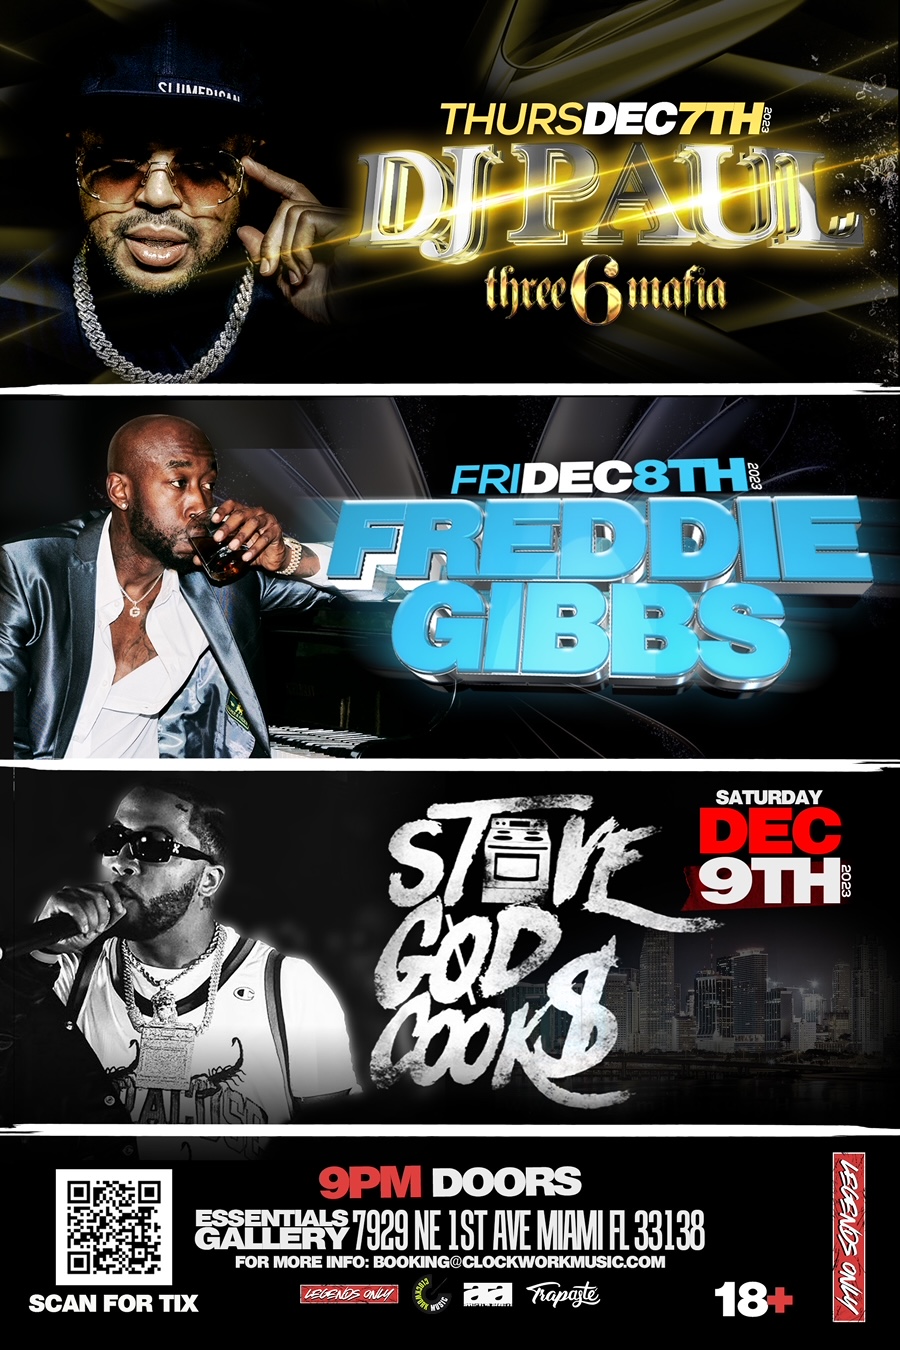 Legends Only X Art Basel Weekend In Miami Featuring Freddie Gibbs, Three 6  Mafia's DJ Paul & Stove God Cooks